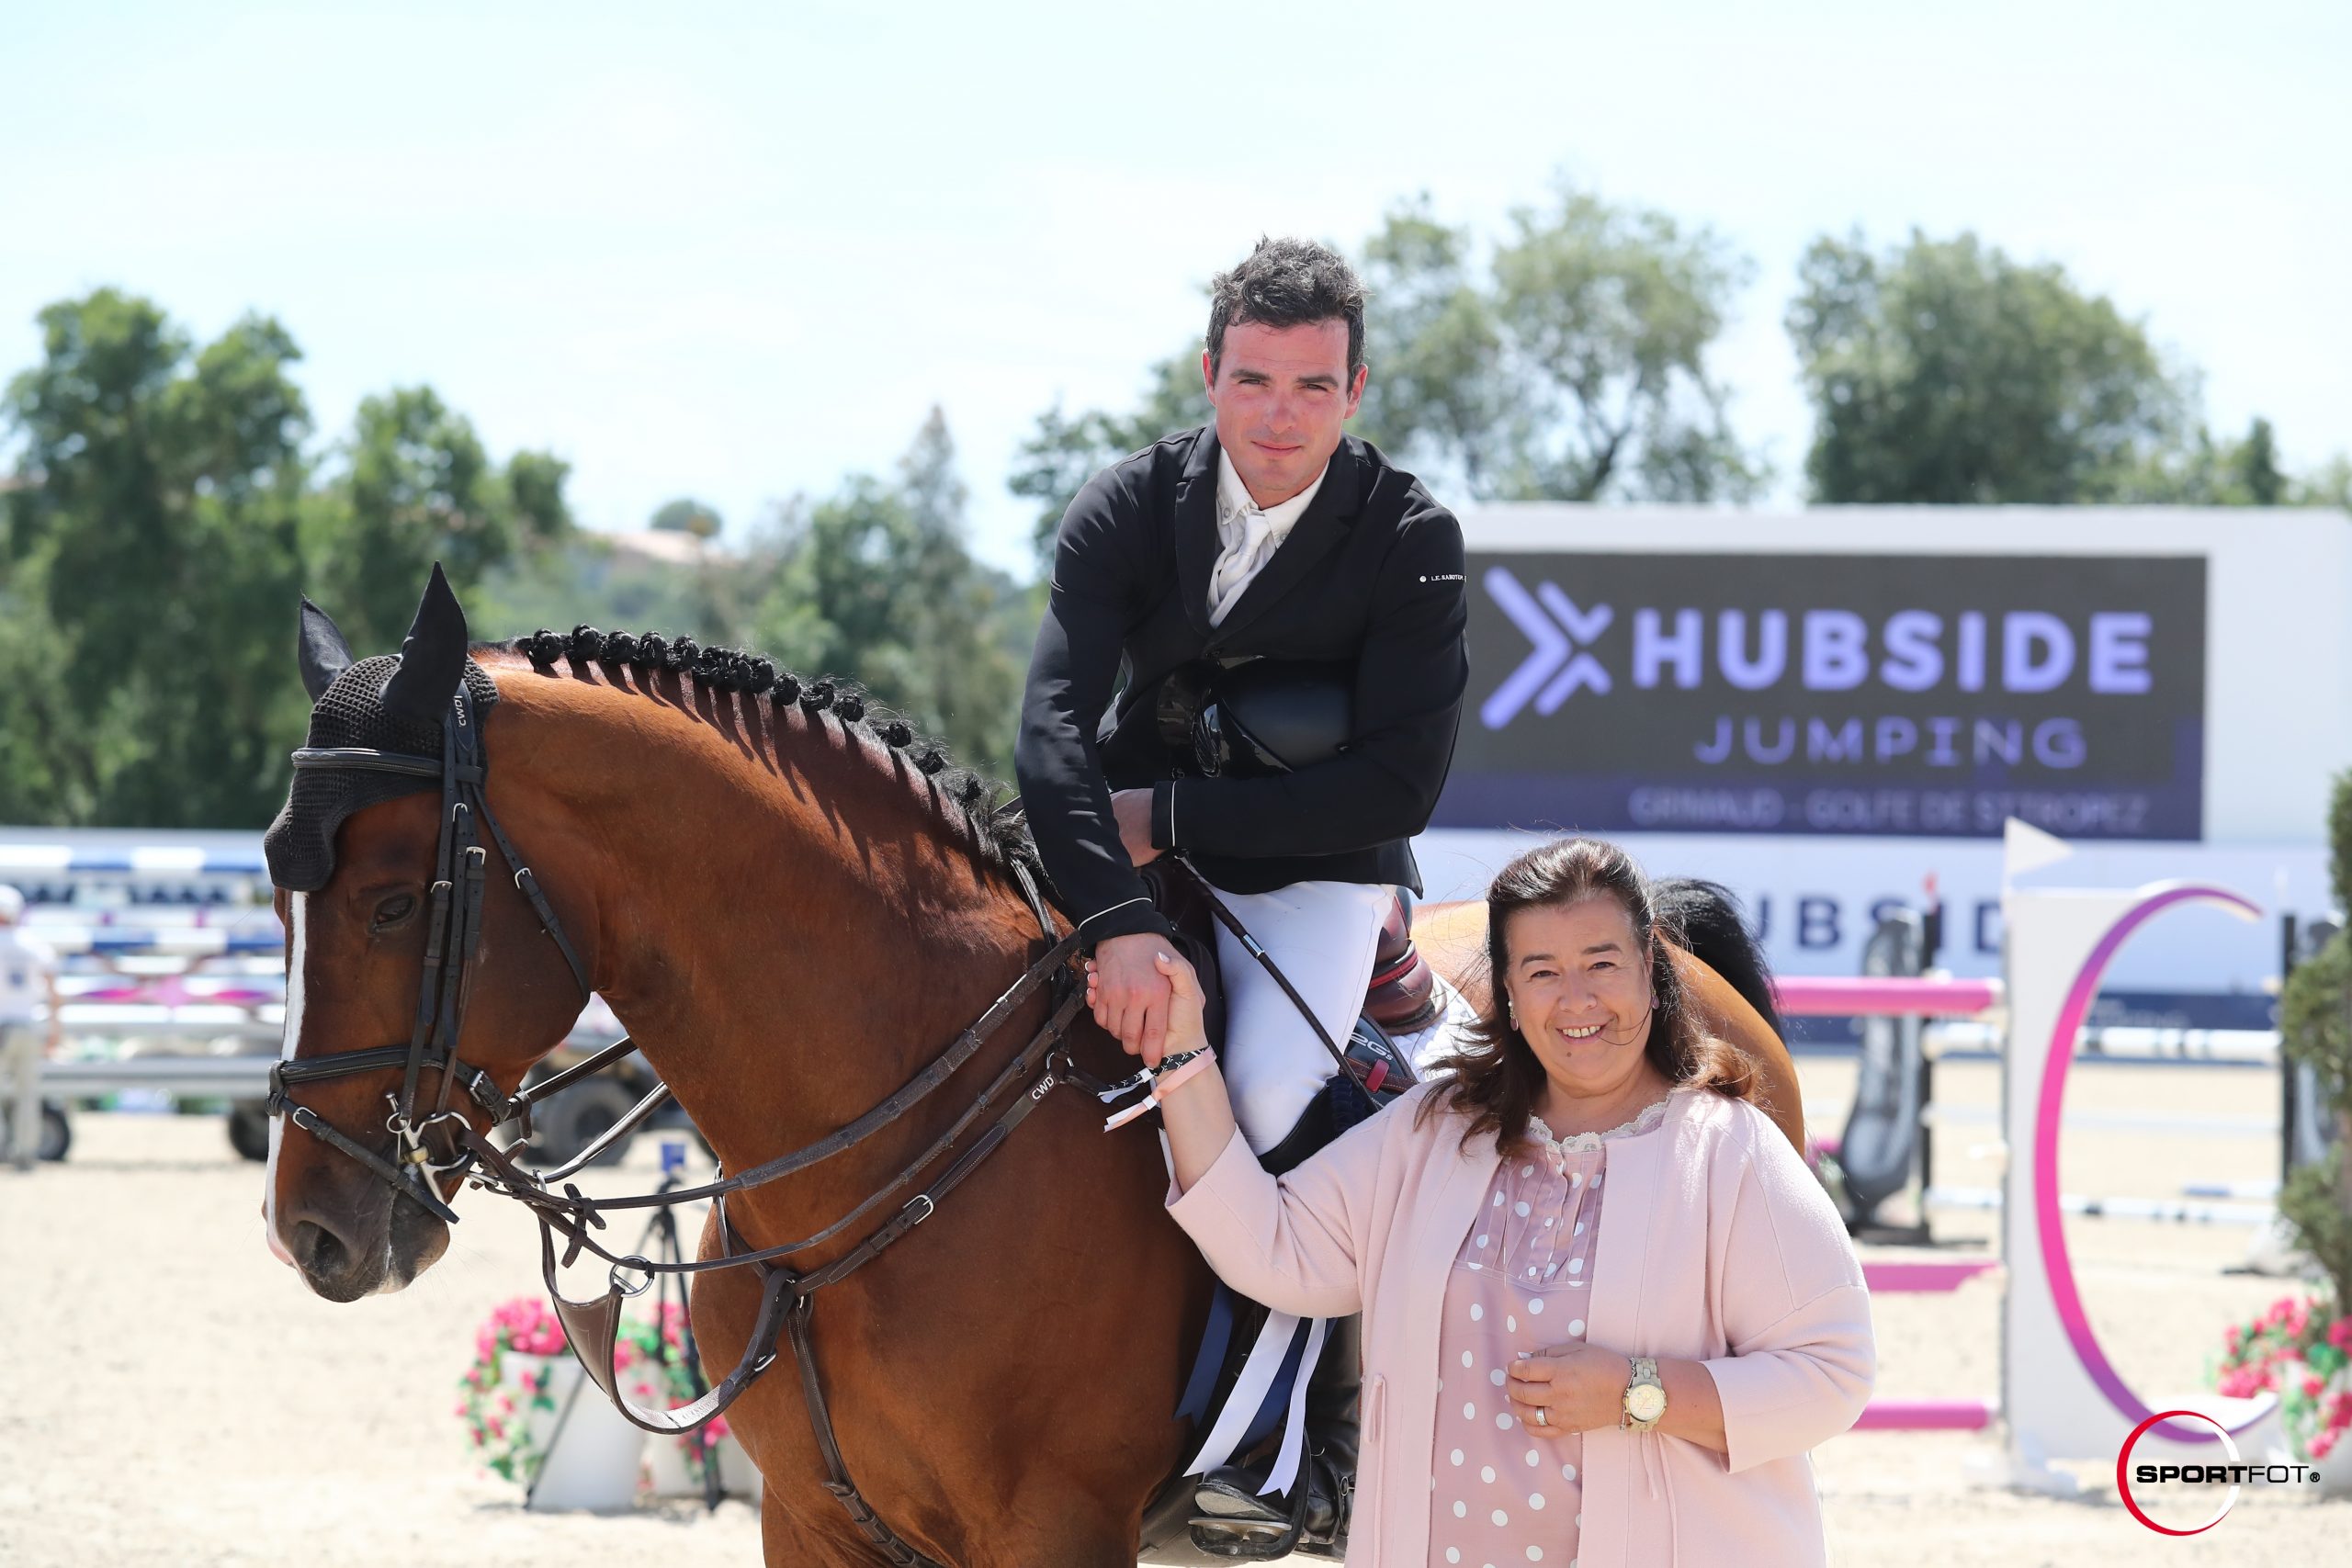 Reference Diesel GP takes the 5th place in the 3* 1.50m LR at Hubside Jumping